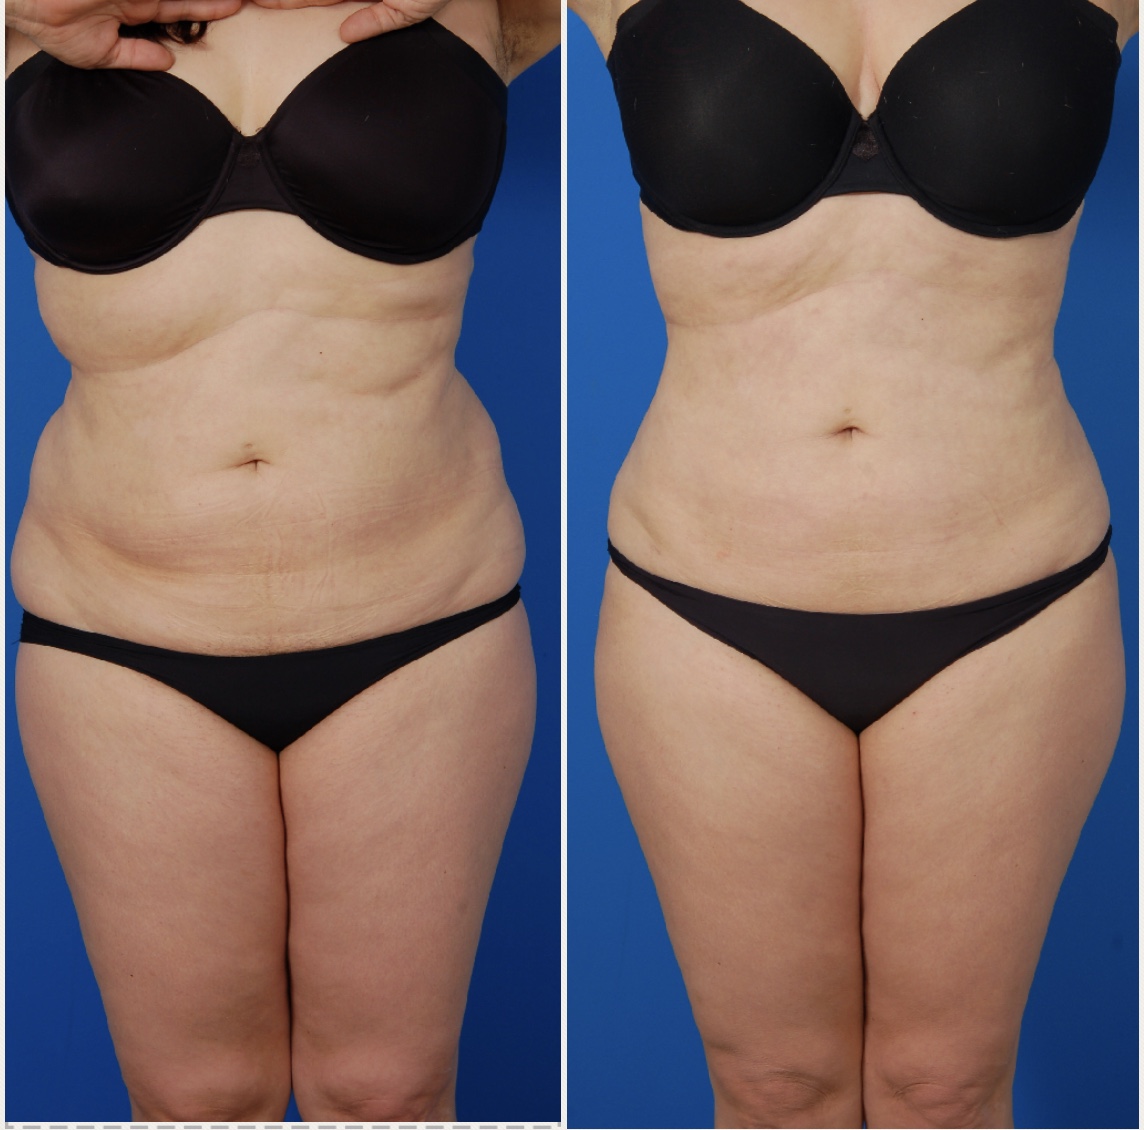 Woman's body, before and after Liposuction Revision Surgery, front view, patient 1